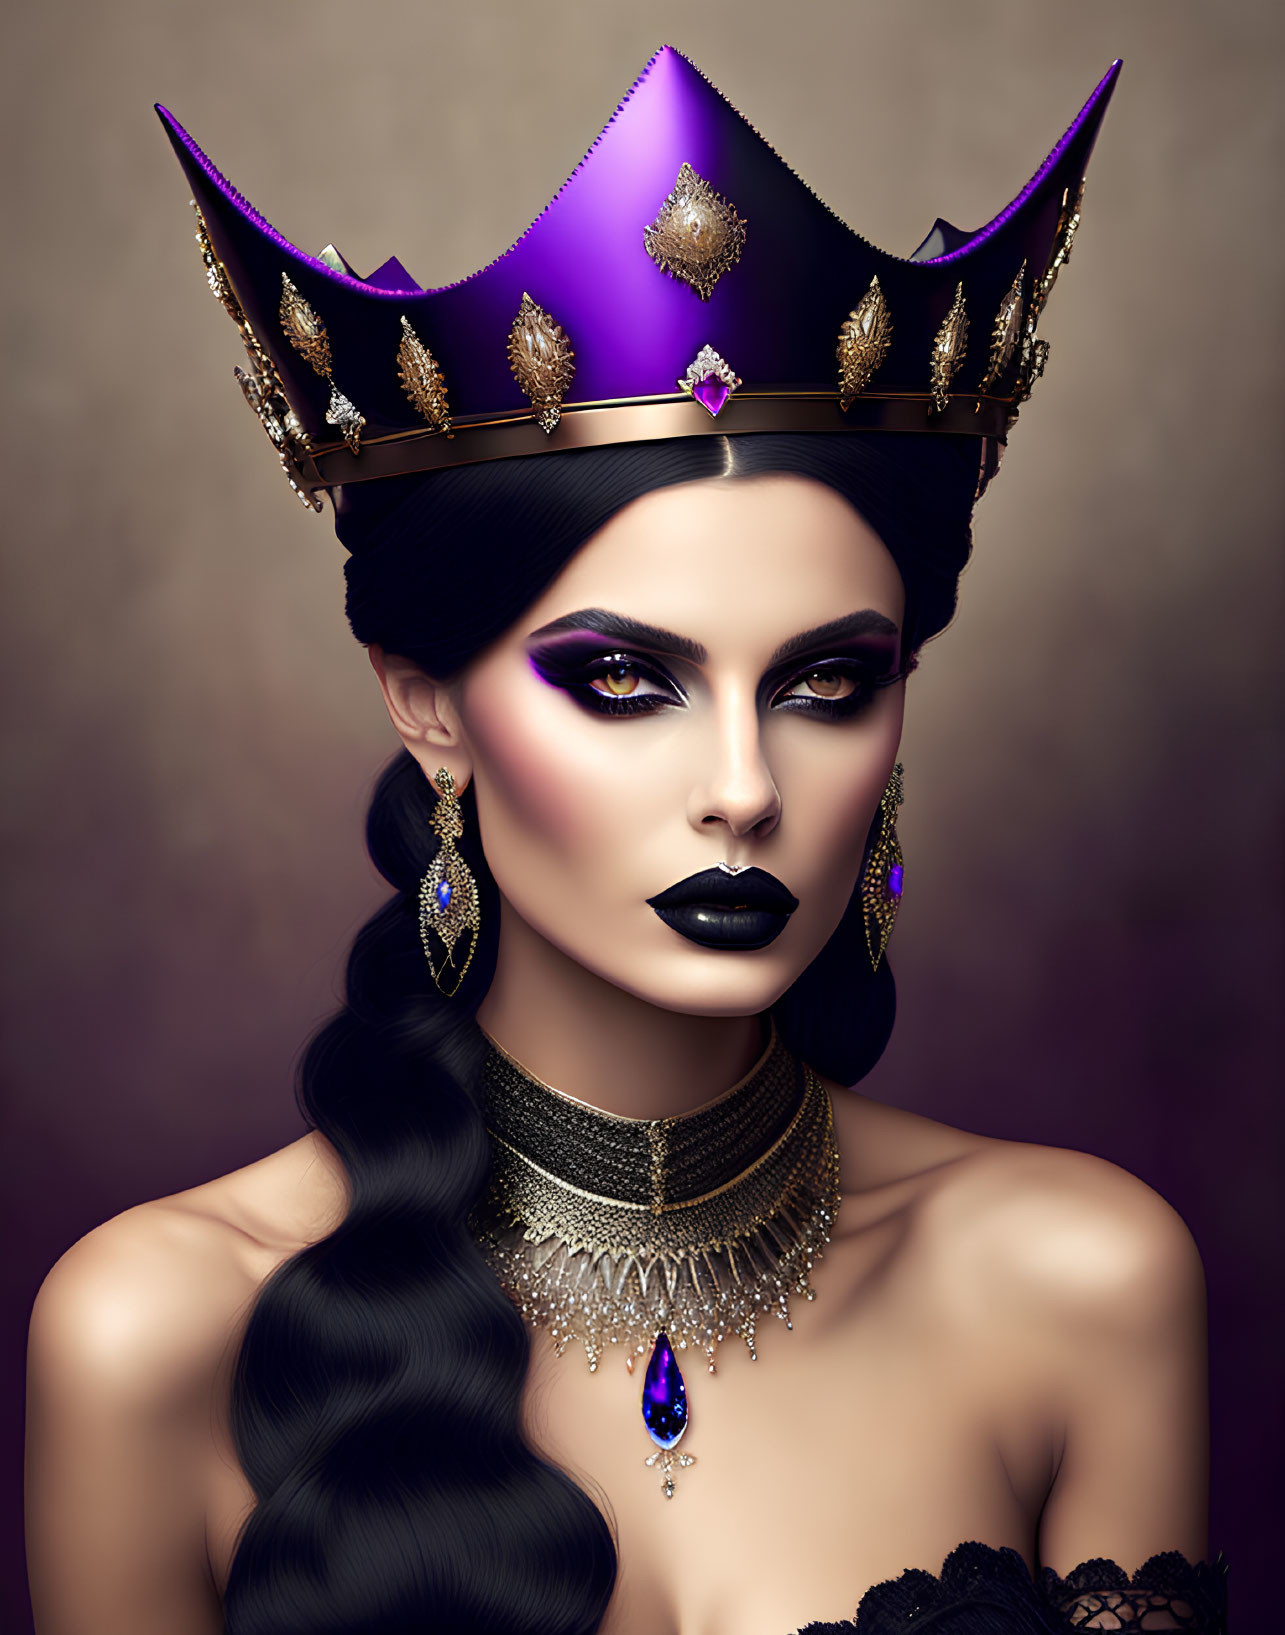 Digital portrait of a woman with dark crown, dramatic makeup, long braid, and ornate jewelry